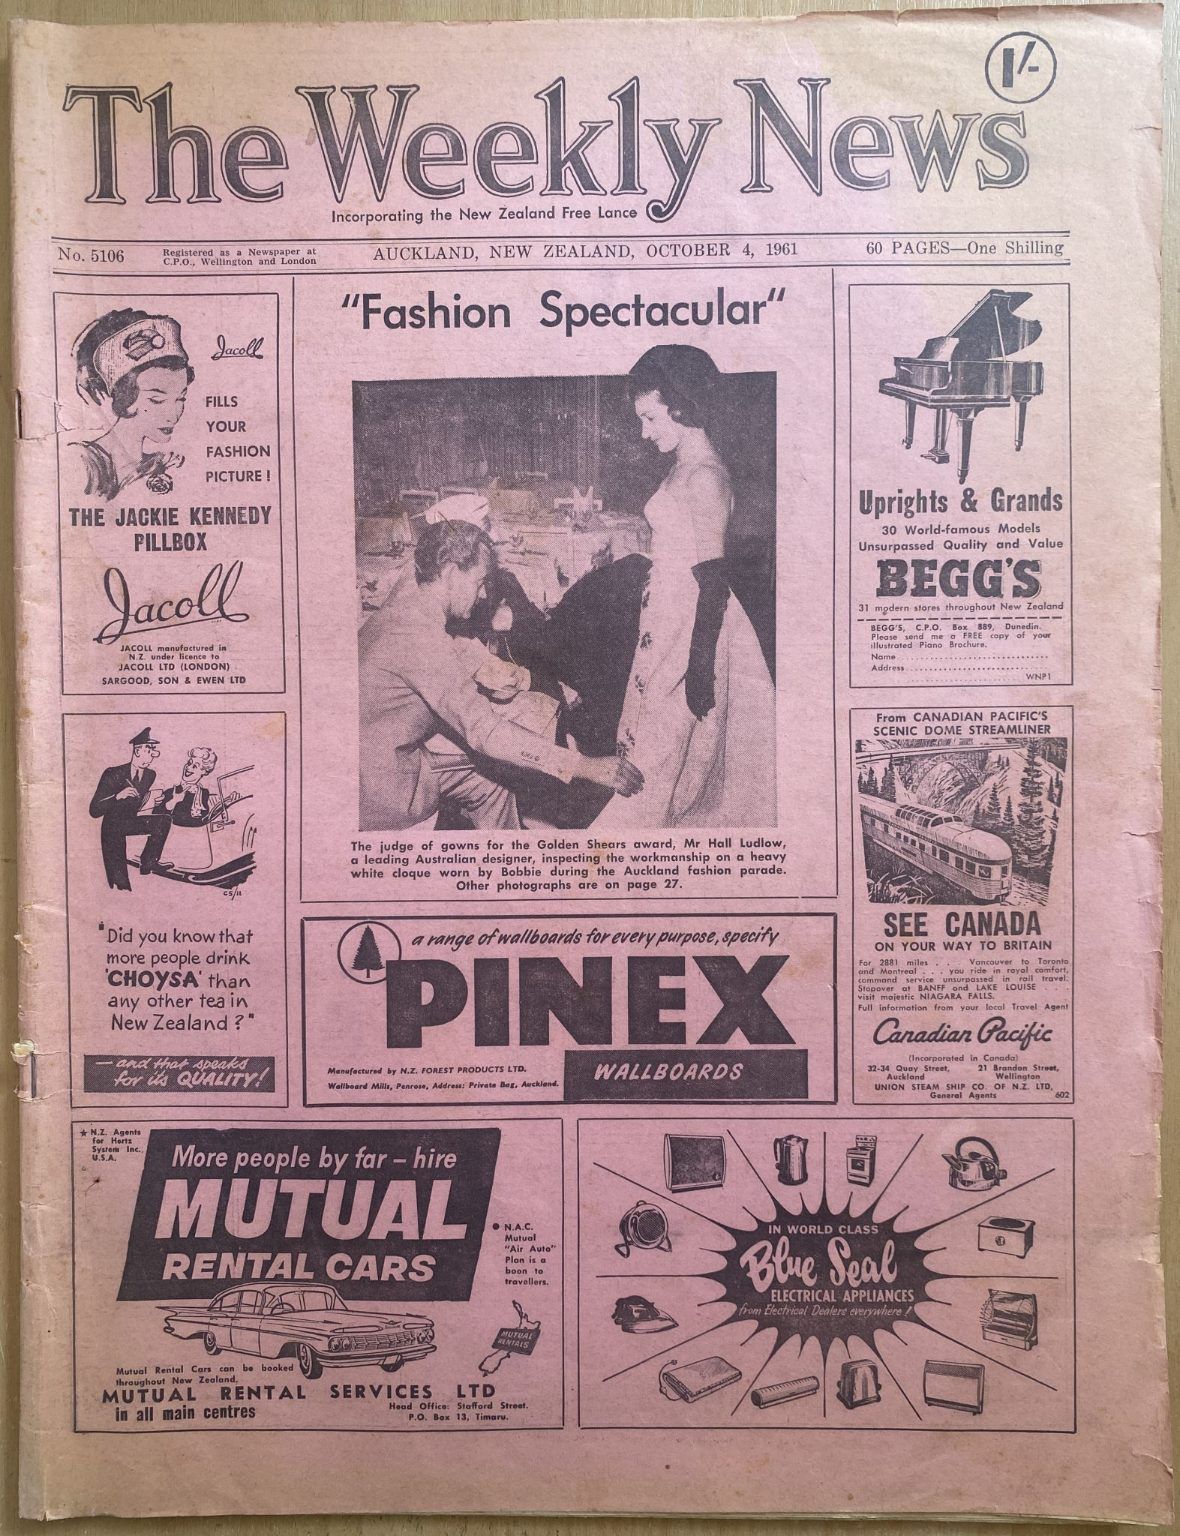 OLD NEWSPAPER: The Weekly News - No. 5106, 4 October 1961